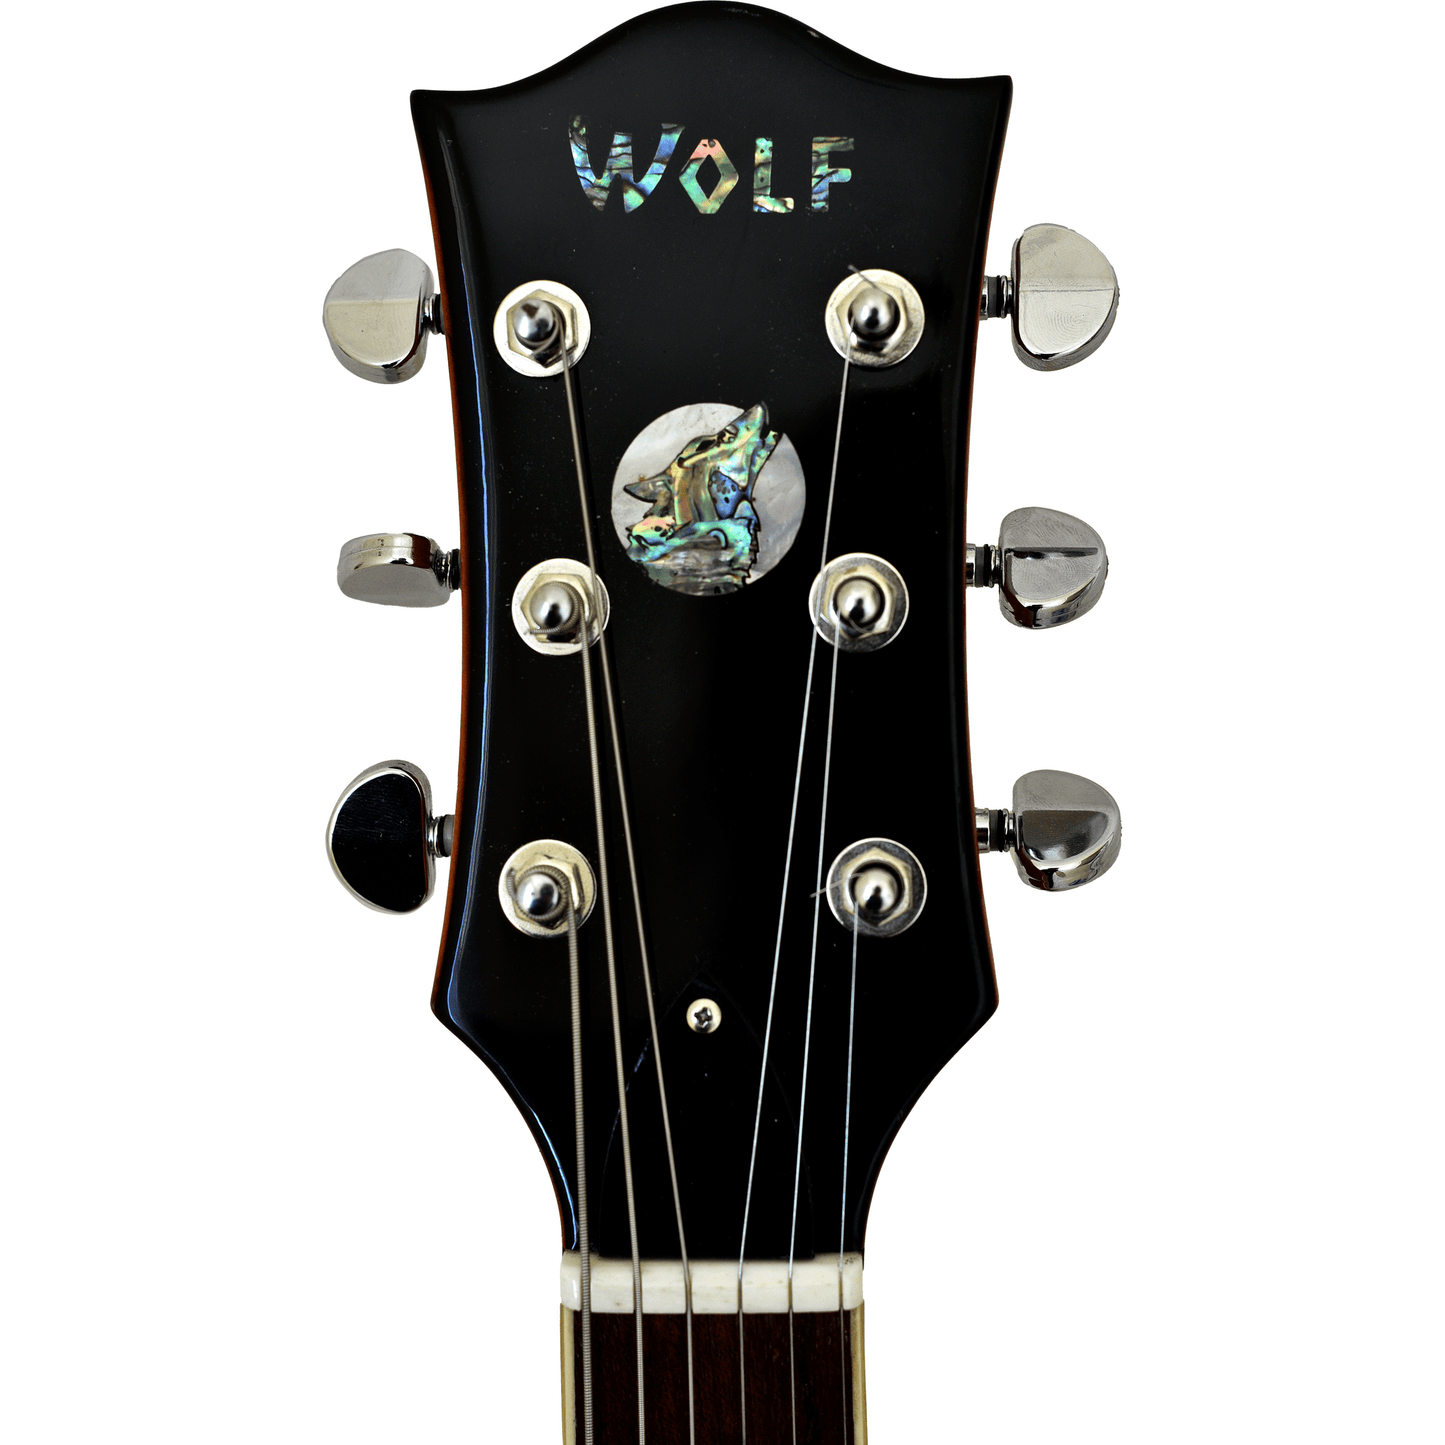 The Chuck Left or Right Hand With Wolf Hard Case